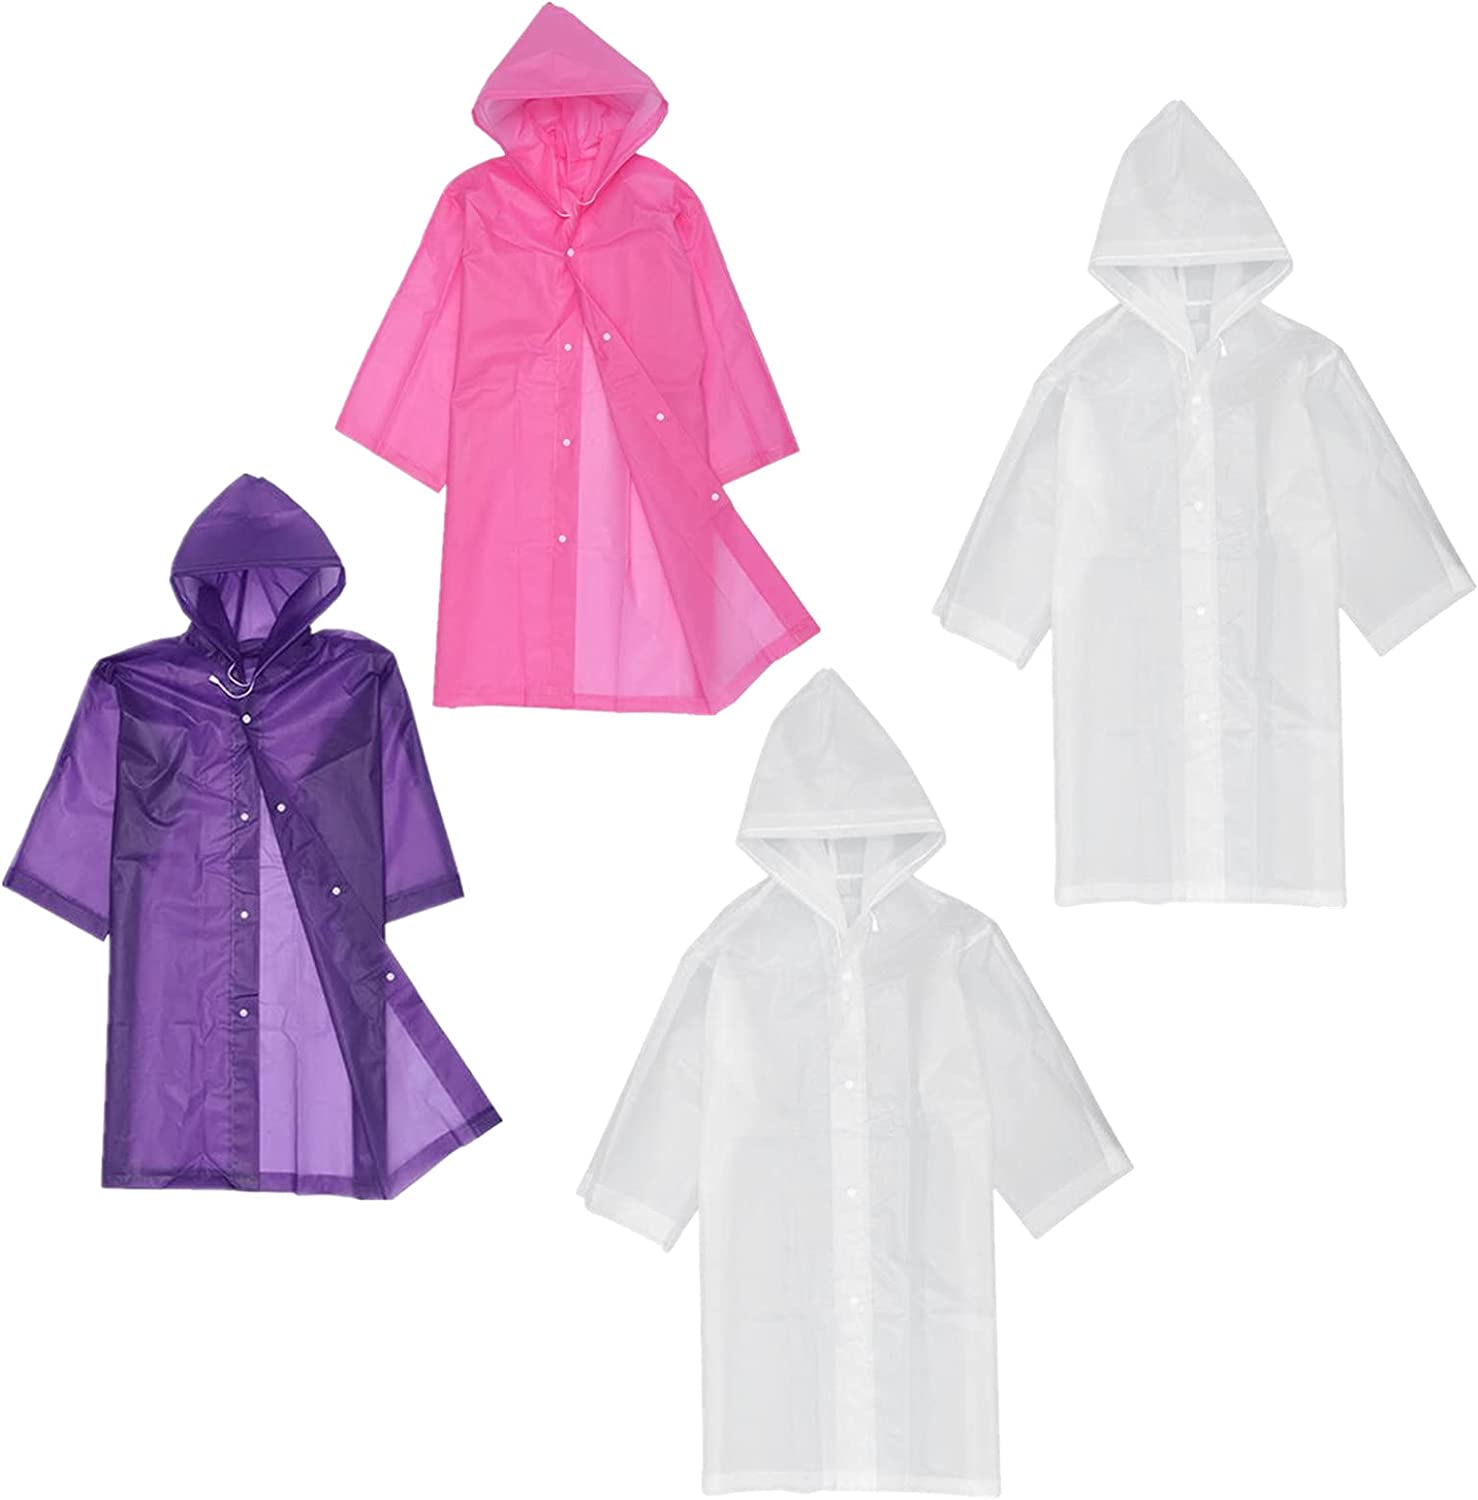 AMYYY Boys Girls EVA Rain Poncho (4 Pack) Reusable Breathable Rainproof With Hoodraincoat,Tight Cuff Design., 1 Purple +1 Pink + 2 White, 43 in